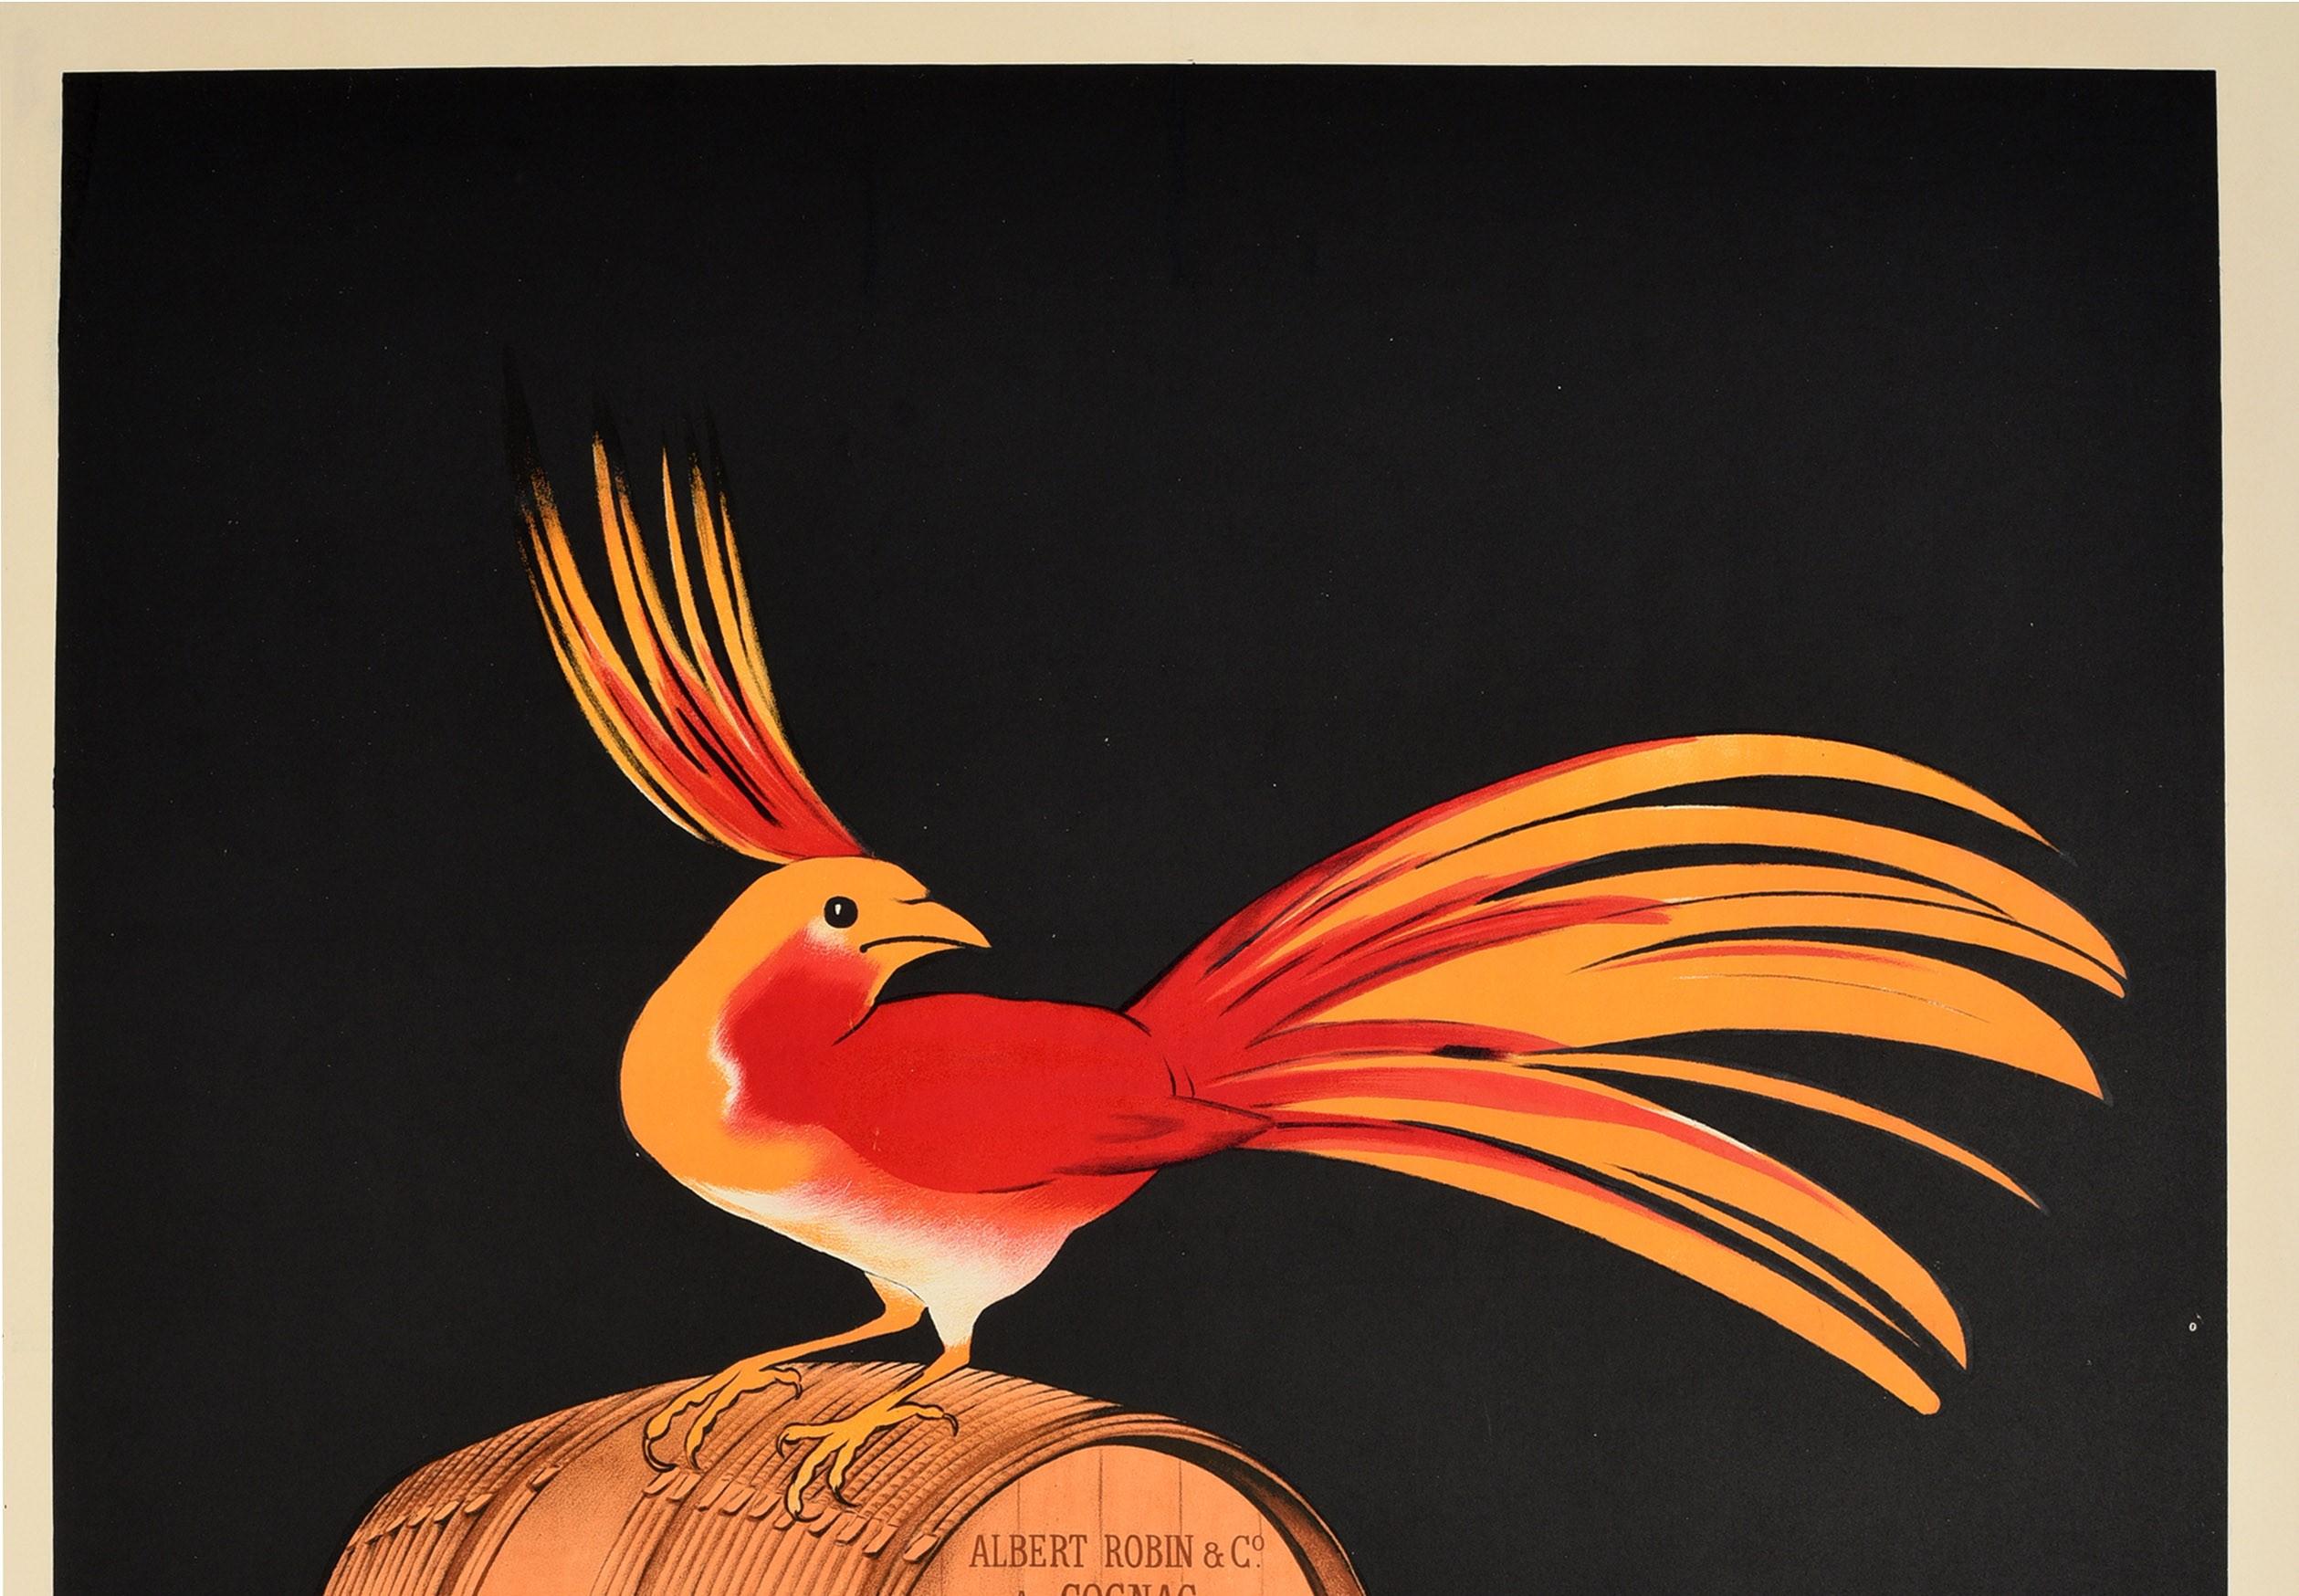 Original antique drink advertising poster for Albert Robin Cognac featuring a stunning design by the renowned poster artist Leonetto Cappiello (1875-1942) depicting a colourful red and orange bird on a wooden barrel of Albert Robin & Co Cognac